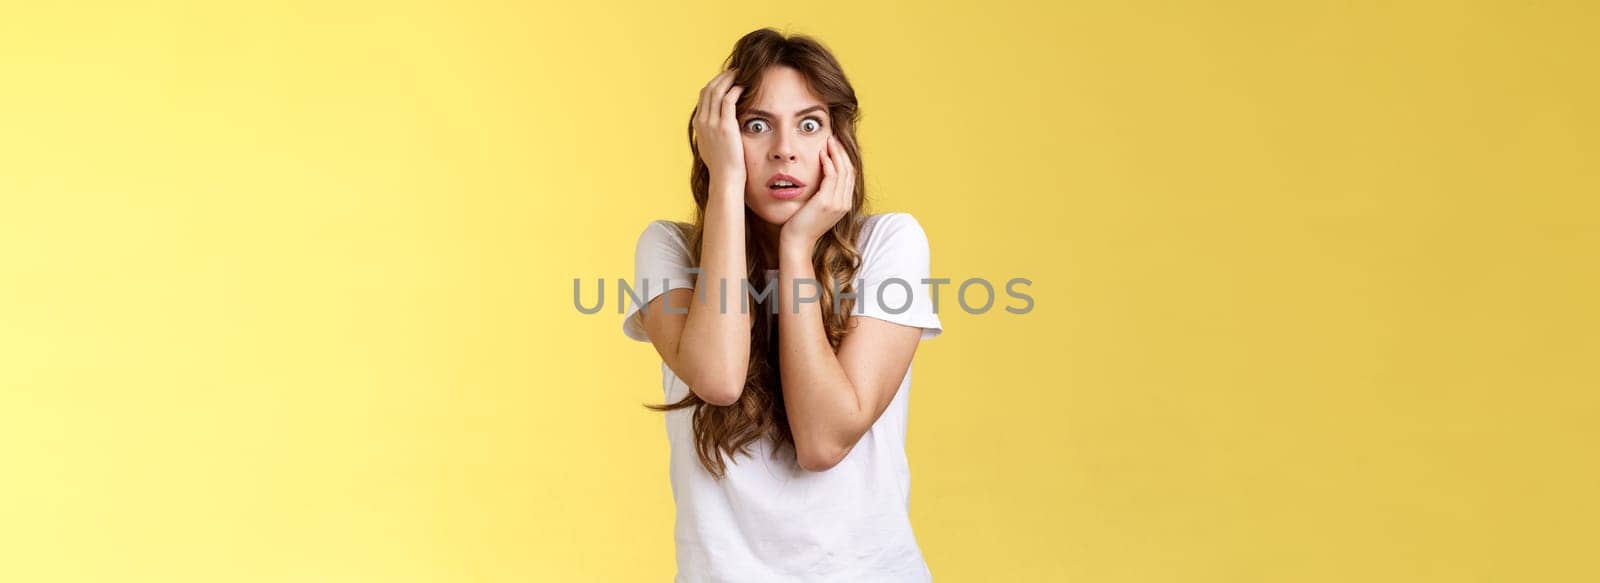 Oh my god someone save me. Scared stunned intense panicking young woman grab head stare camera frightened open mouth gasping shocked standing stupor yellow background timid insecure.